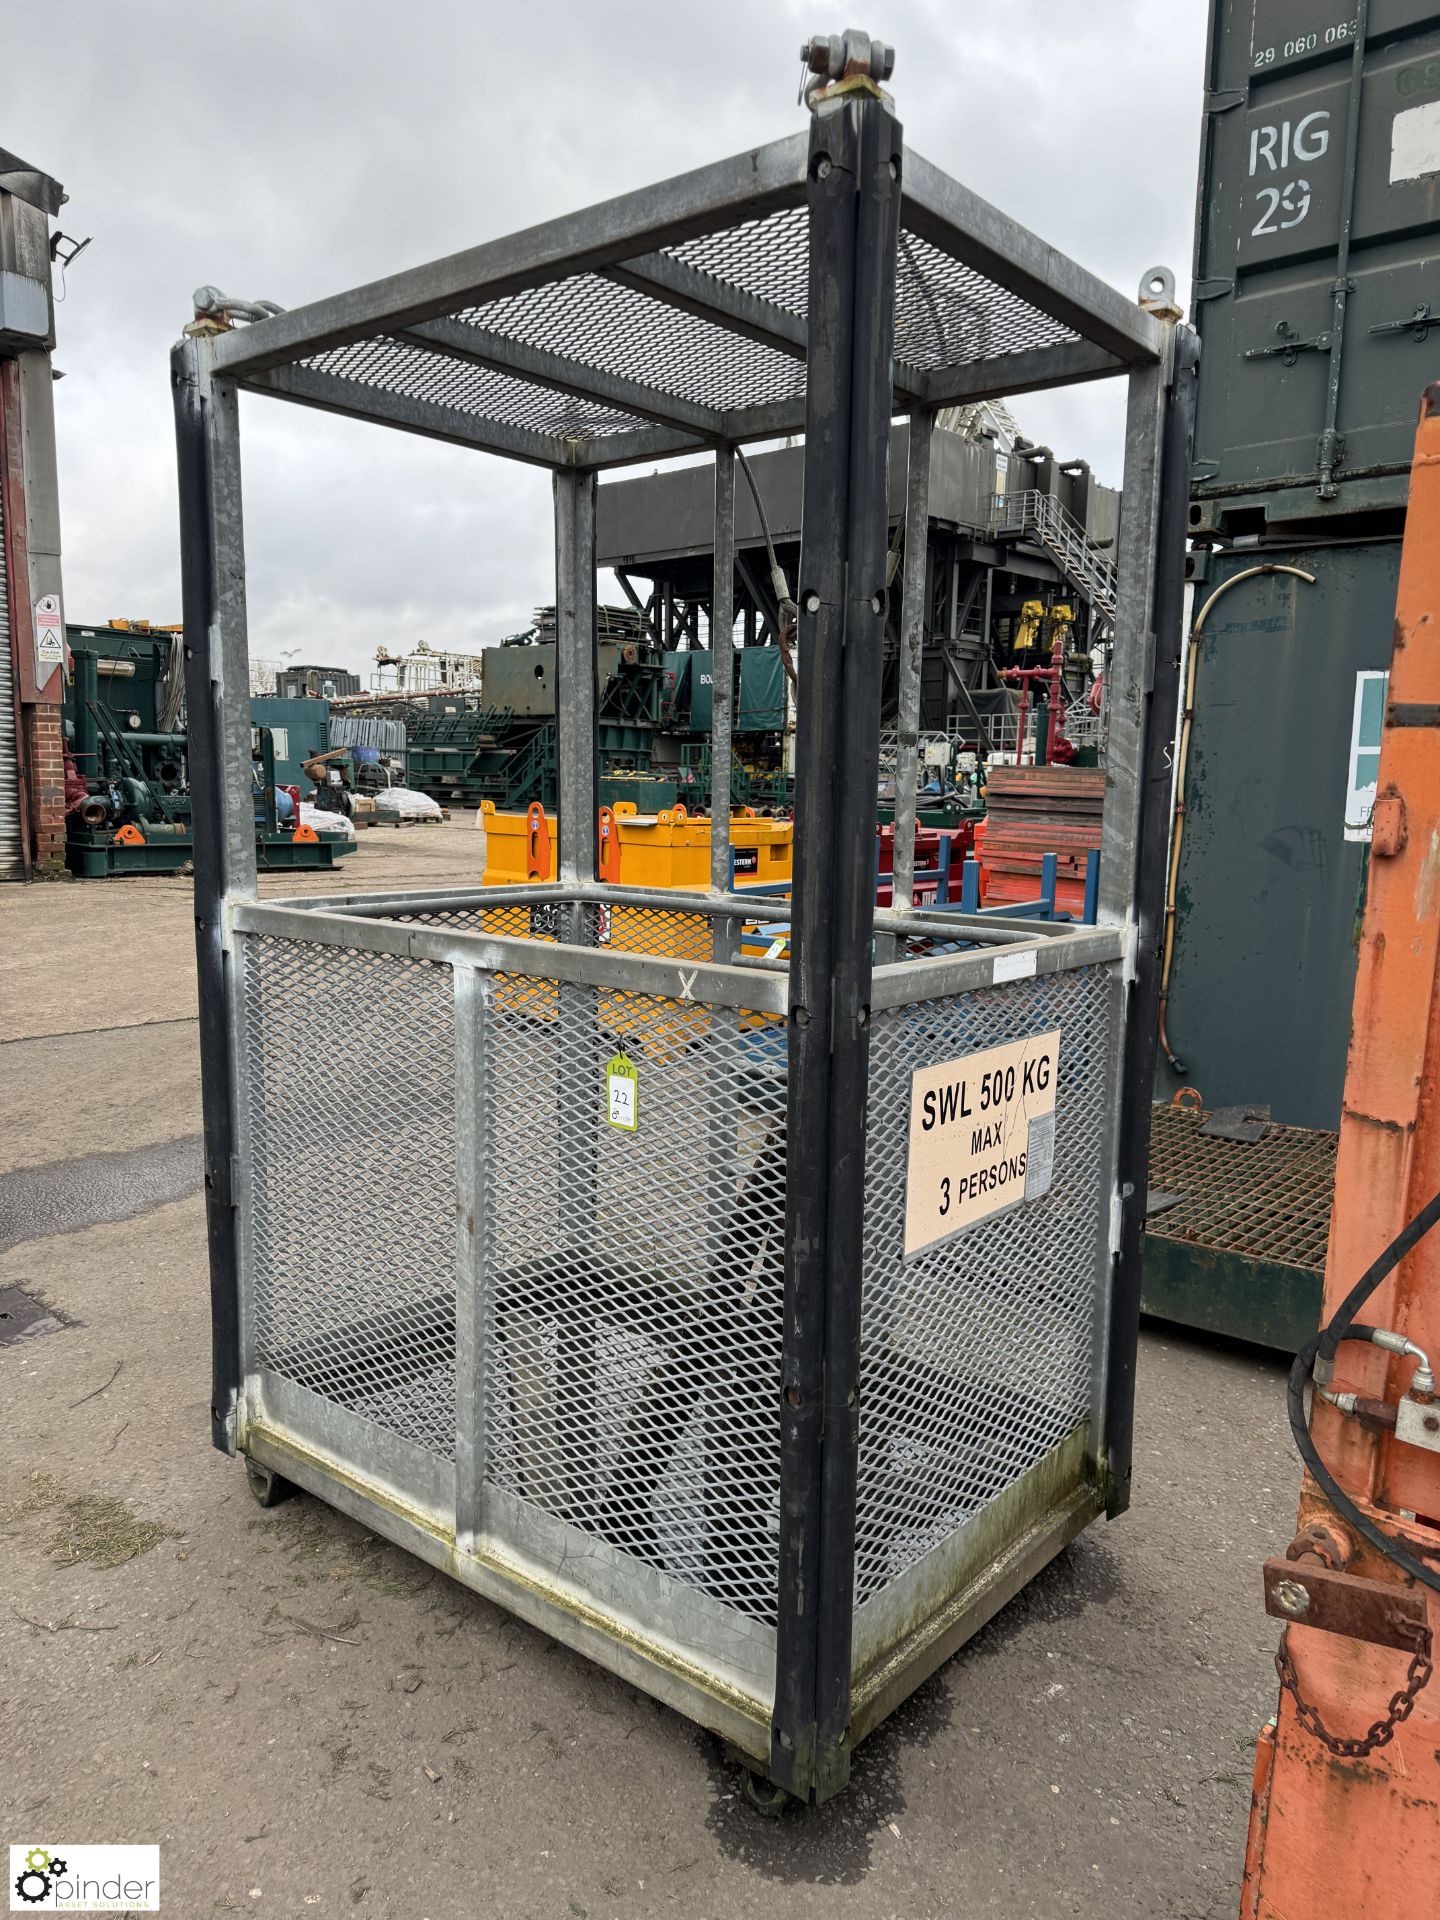 Crane type Man Lift Cage, swl 500kg, 3 person, 1500mm x 1000mm x 2300mm - Image 2 of 4